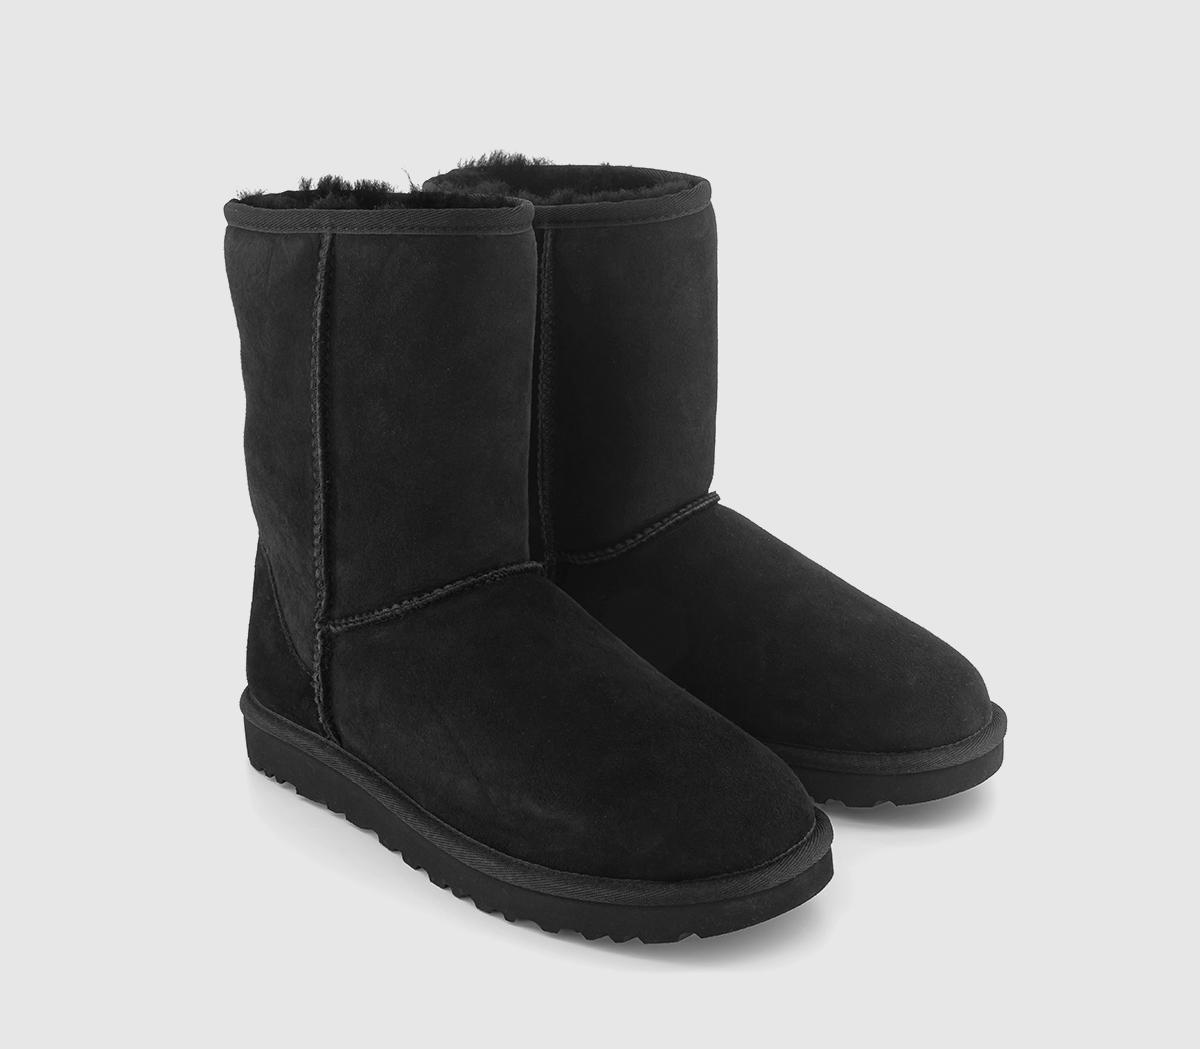 UGG Womens Black Suede Classic Short Ii Boots, 4